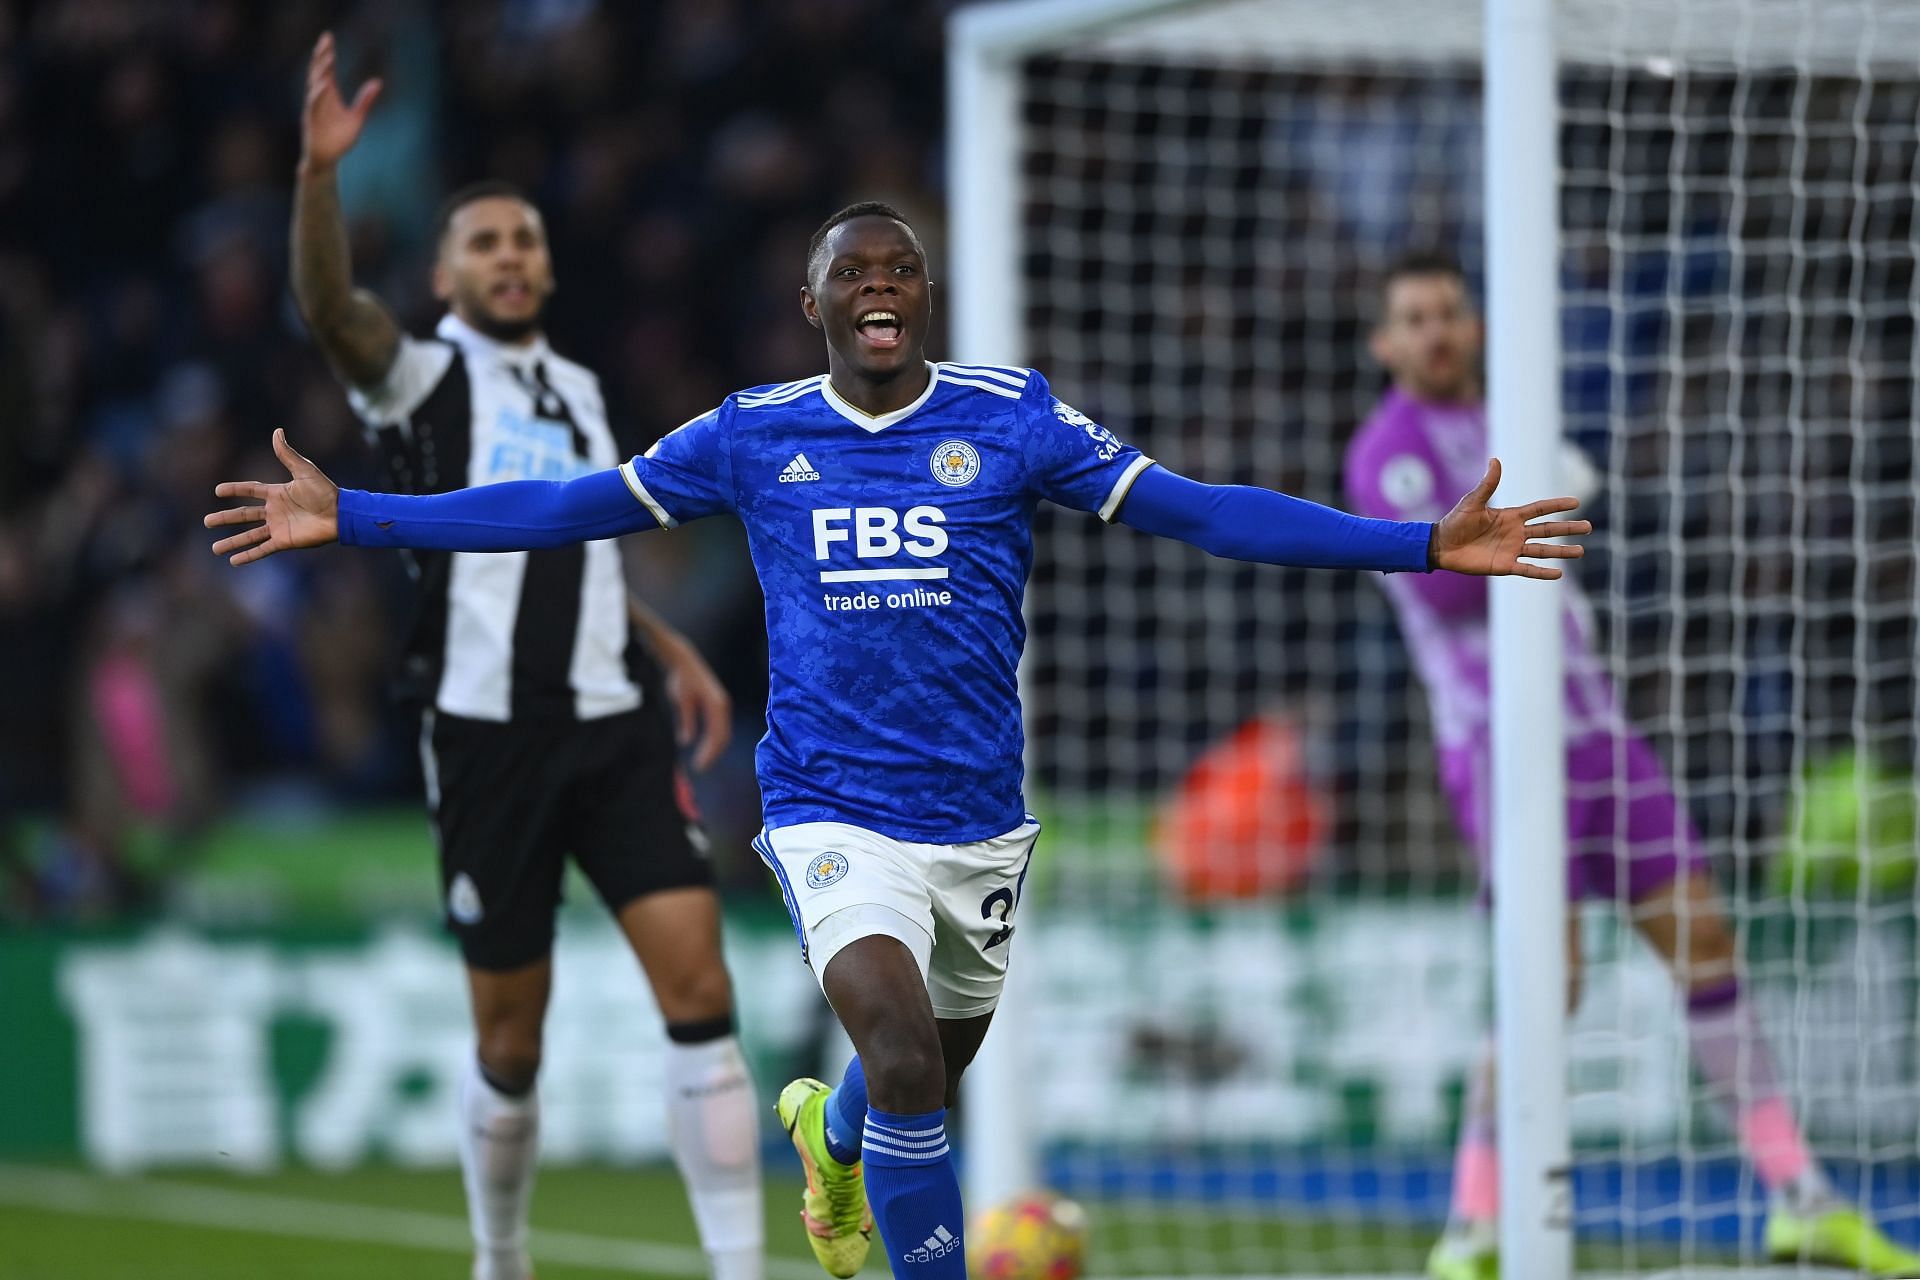 Leicester City take on Newcastle United this weekend